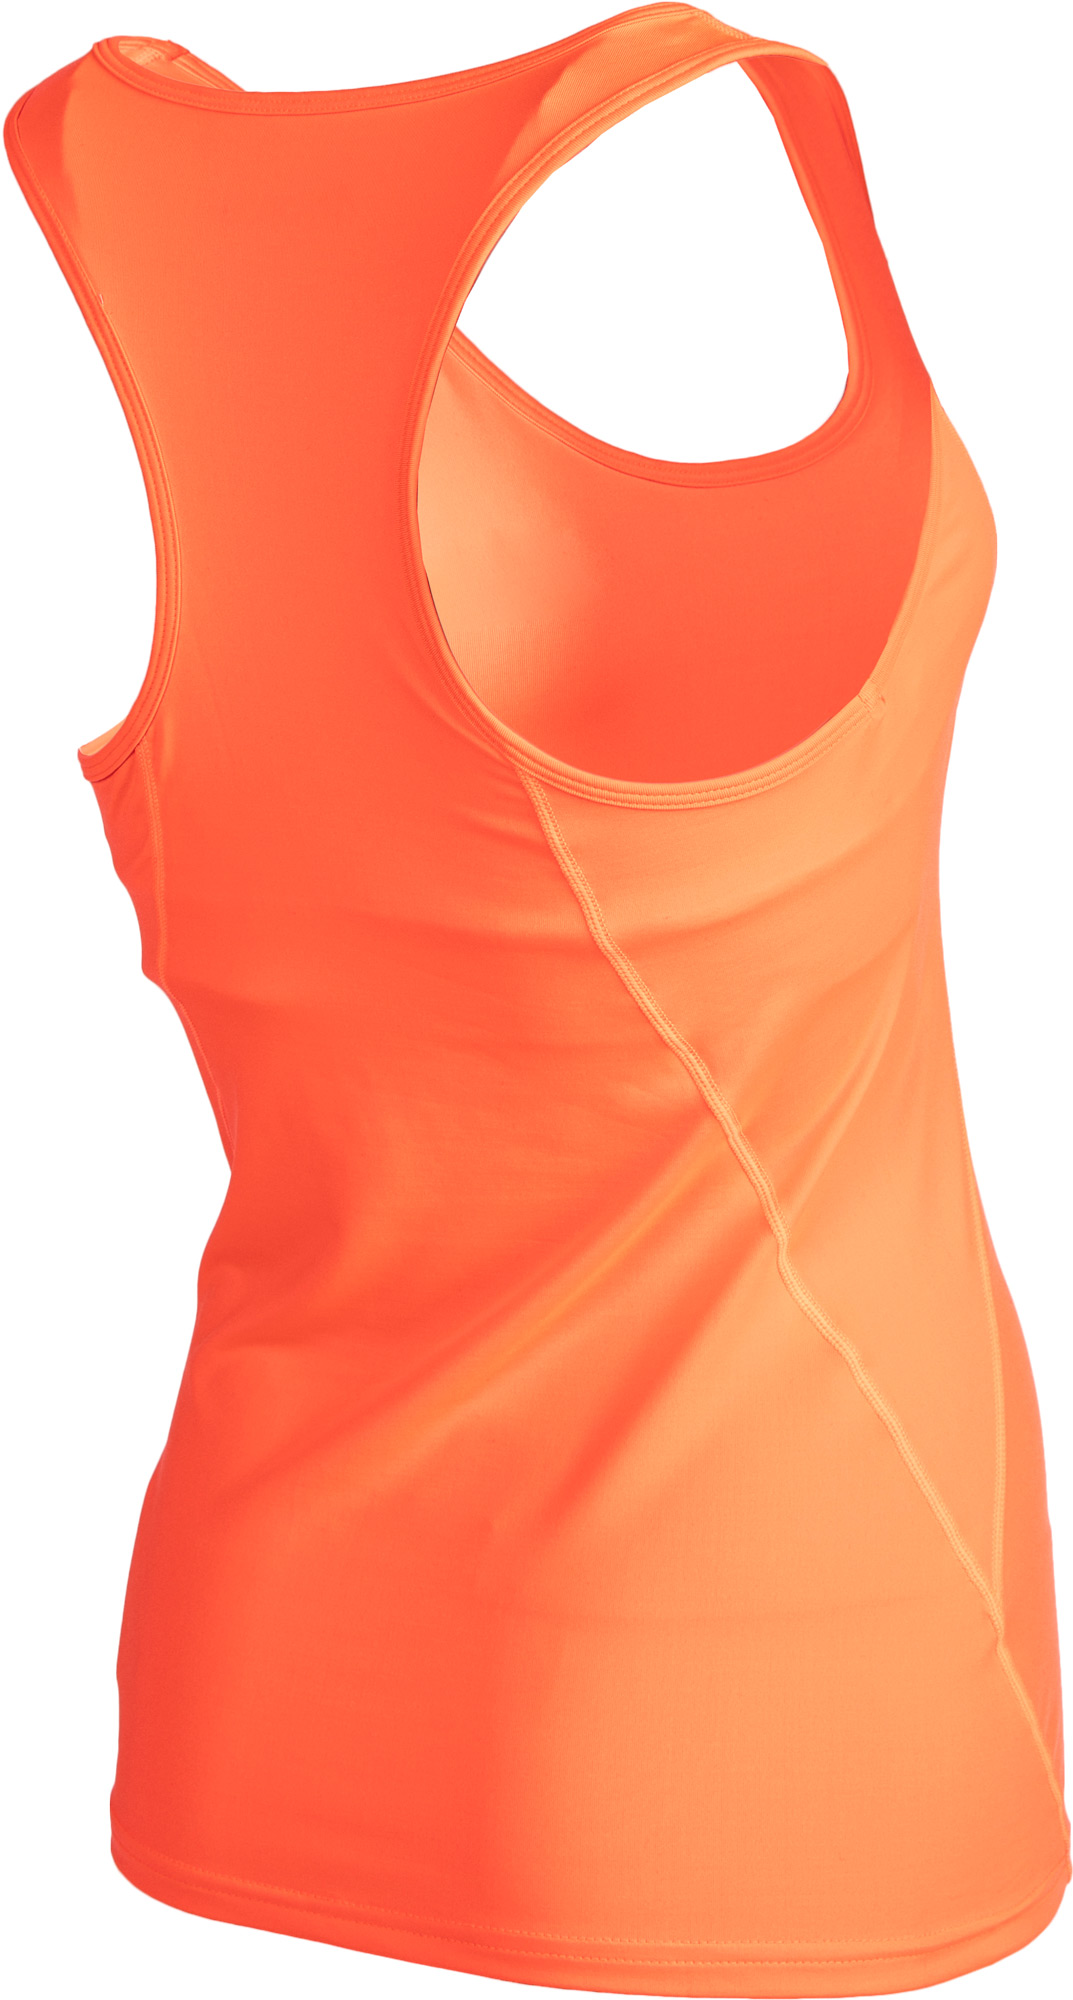 Women’s top with a built-in bra